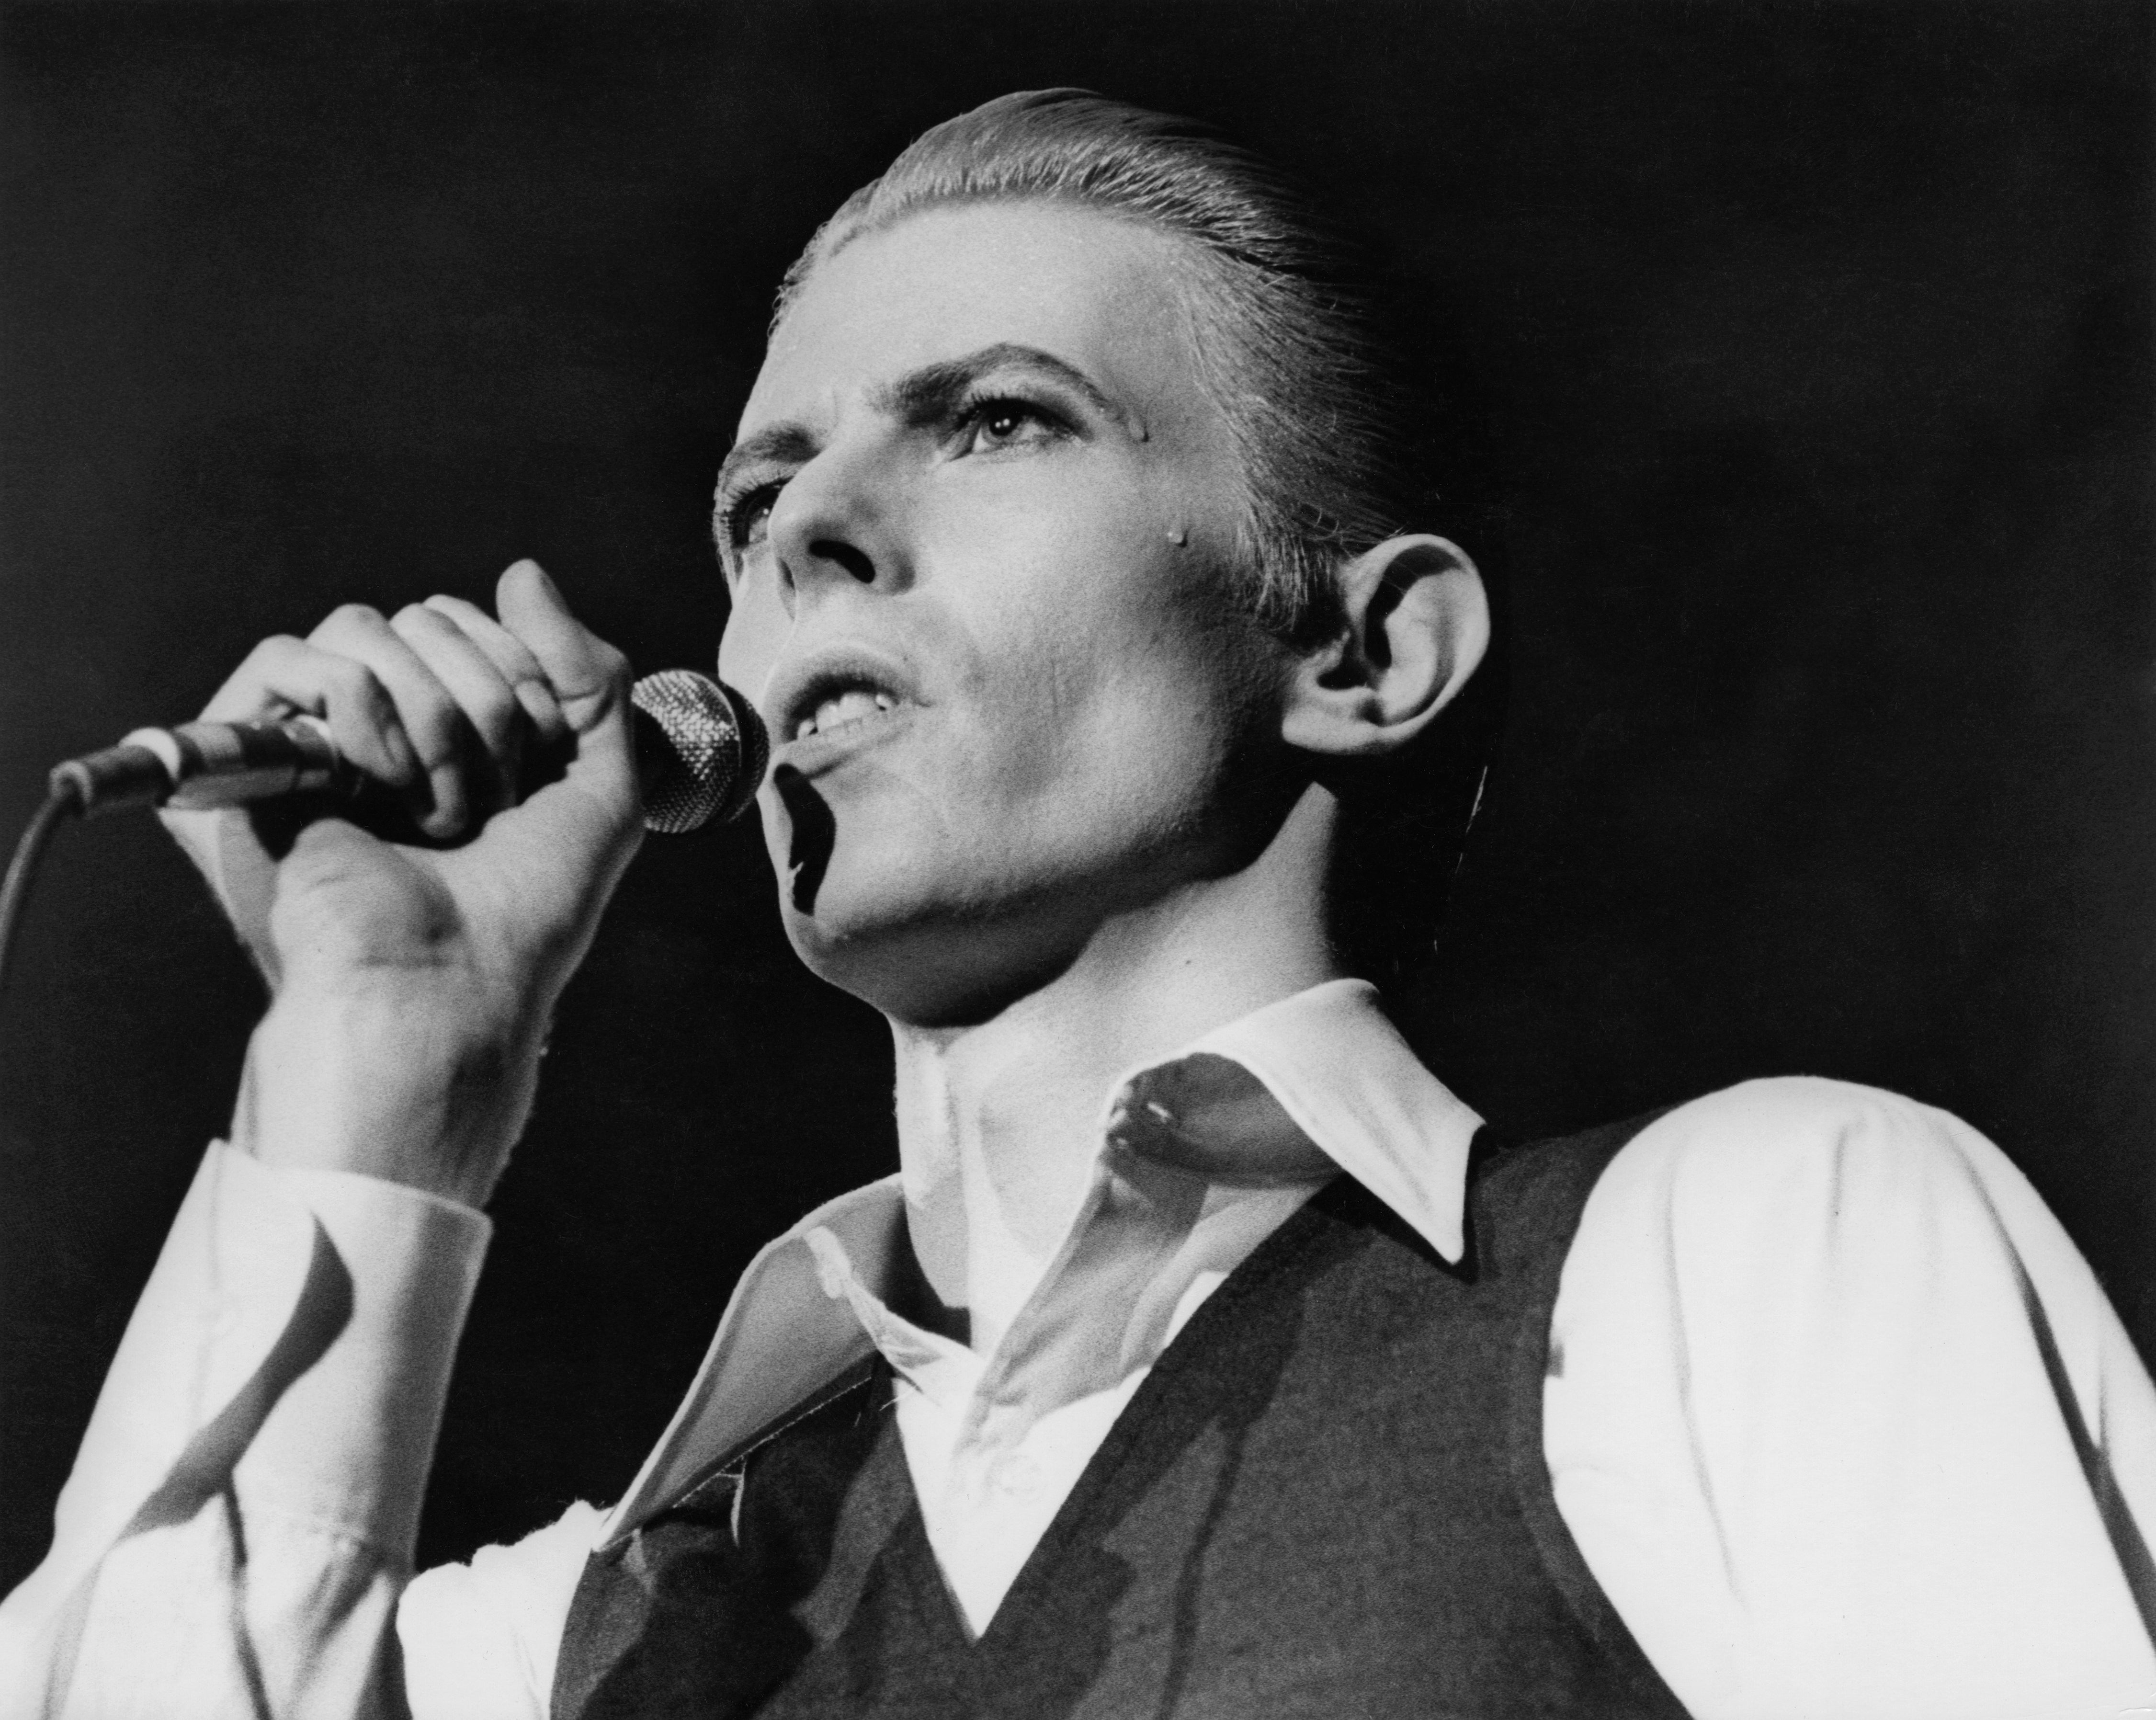 David Bowie didn’t eat and survived by drinking milk while making music at Rockfield Studios in the 1970s, a child of a staff member has claimed